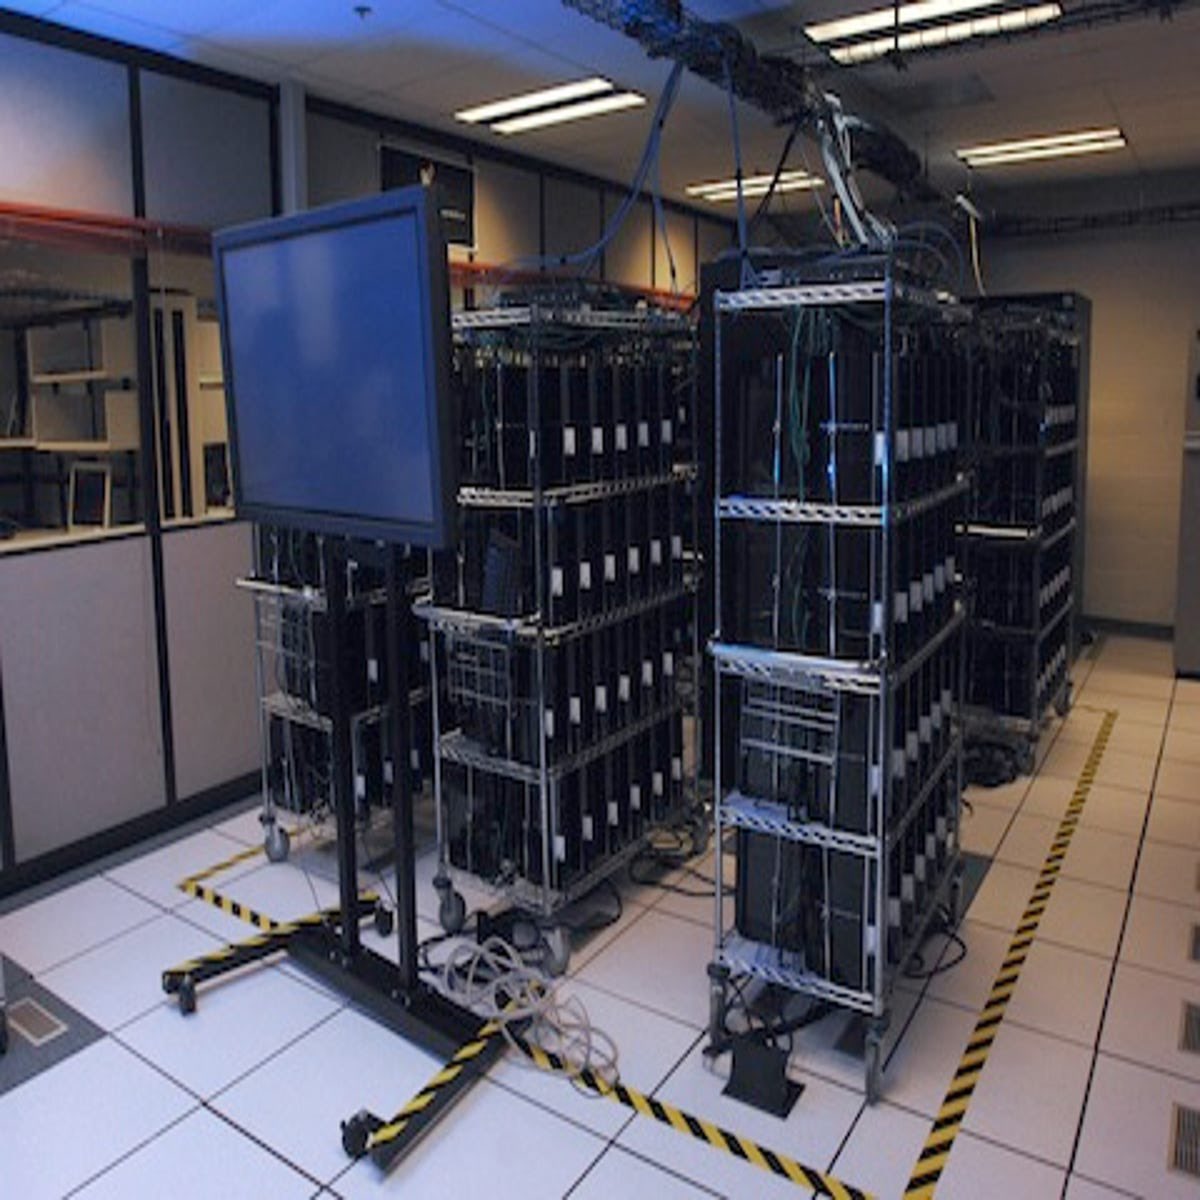 Fact of the day 💡

In 2010, the USA Air Force made a supercomputer called Condor Cluster by connecting 1760 PlayStation 3 units together.